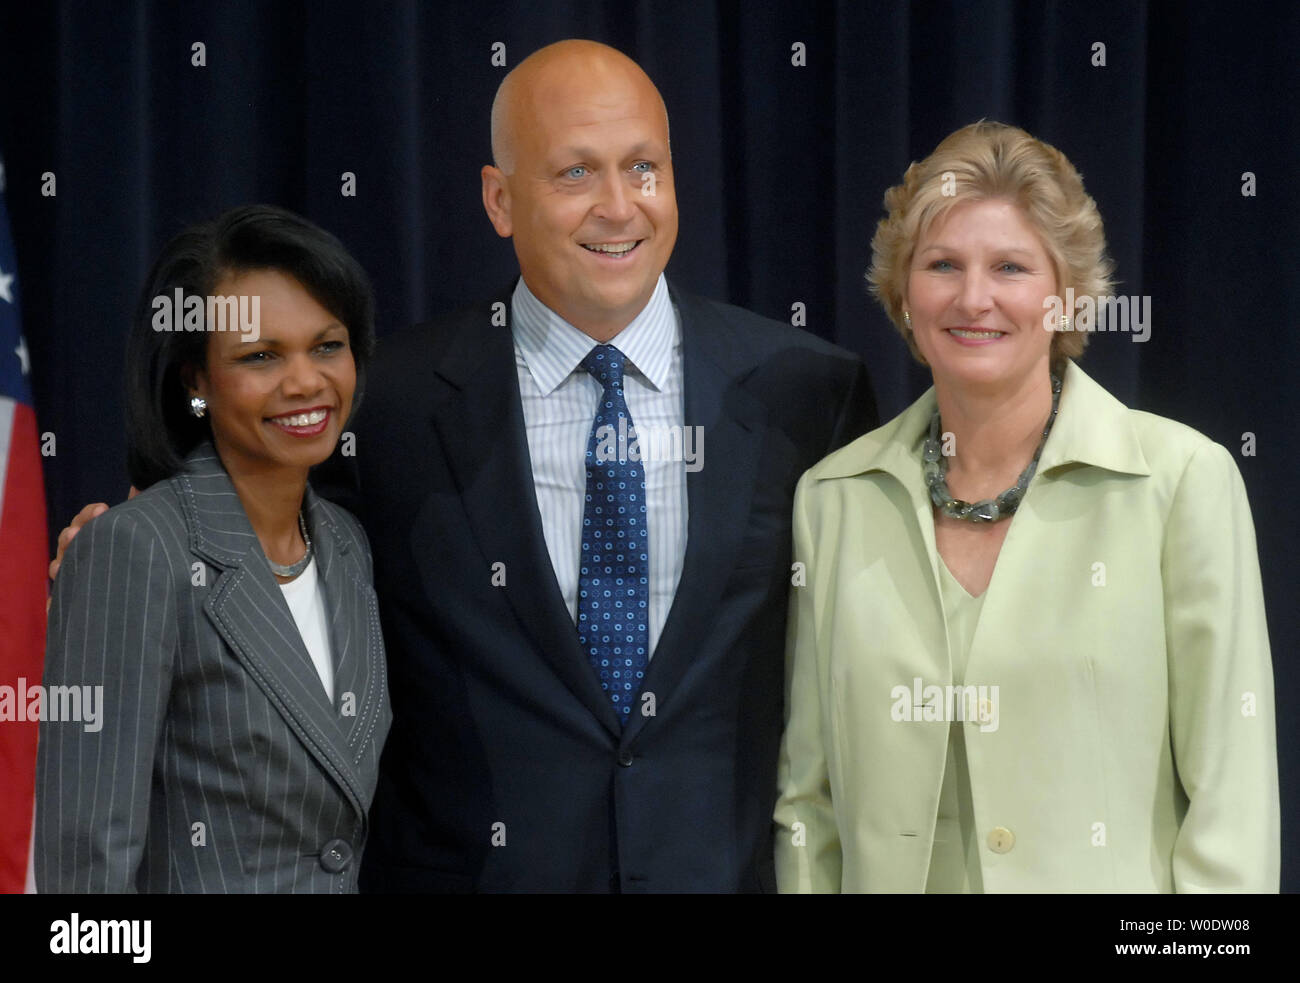 Baseball Hall of Famer Cal Ripken Jr. (C) poses with Secretary of State Condoleezza Rice (L) and Undersecretary of State Karen Hughes after Ripken was announced as a special sports envoy to the State Department during a ceremony at the State Department in Washington on August 13, 2007. (UPI Photo/Kevin Dietsch) Stock Photo